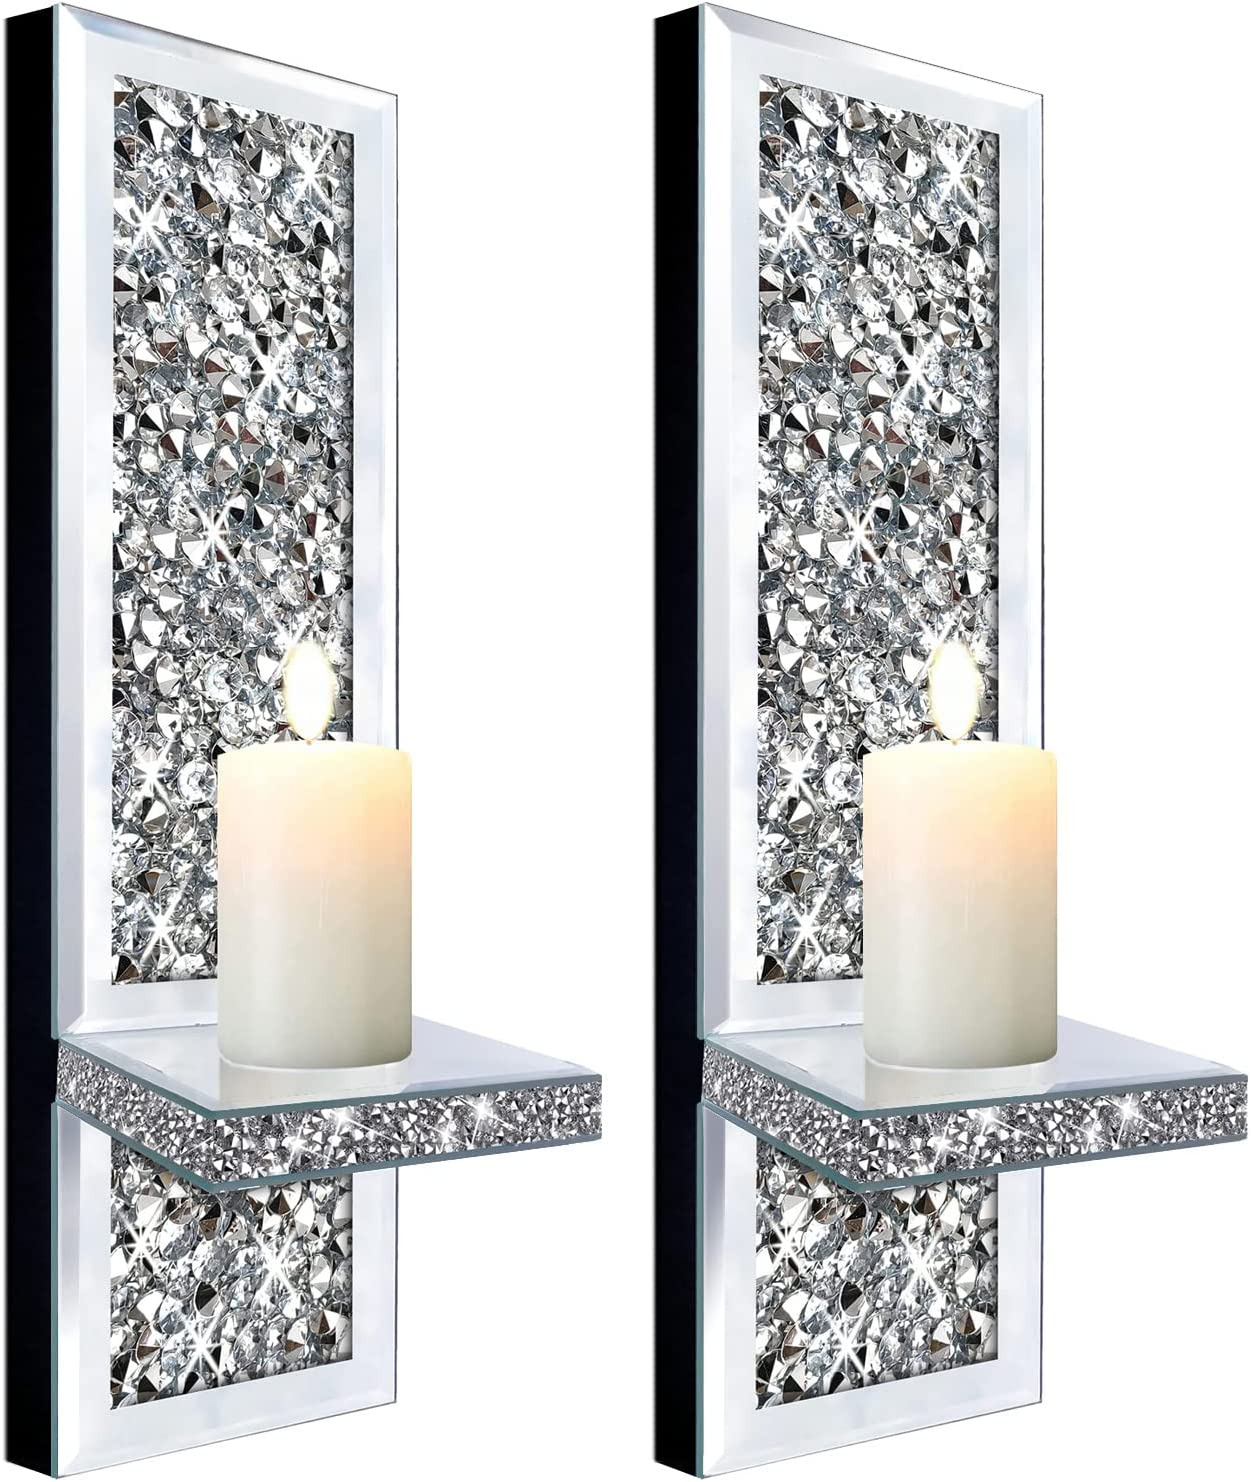 Set of 2 Crystal Crush Diamond Candle Sconces, Gorgeous Silver Mirrored Wall Sco